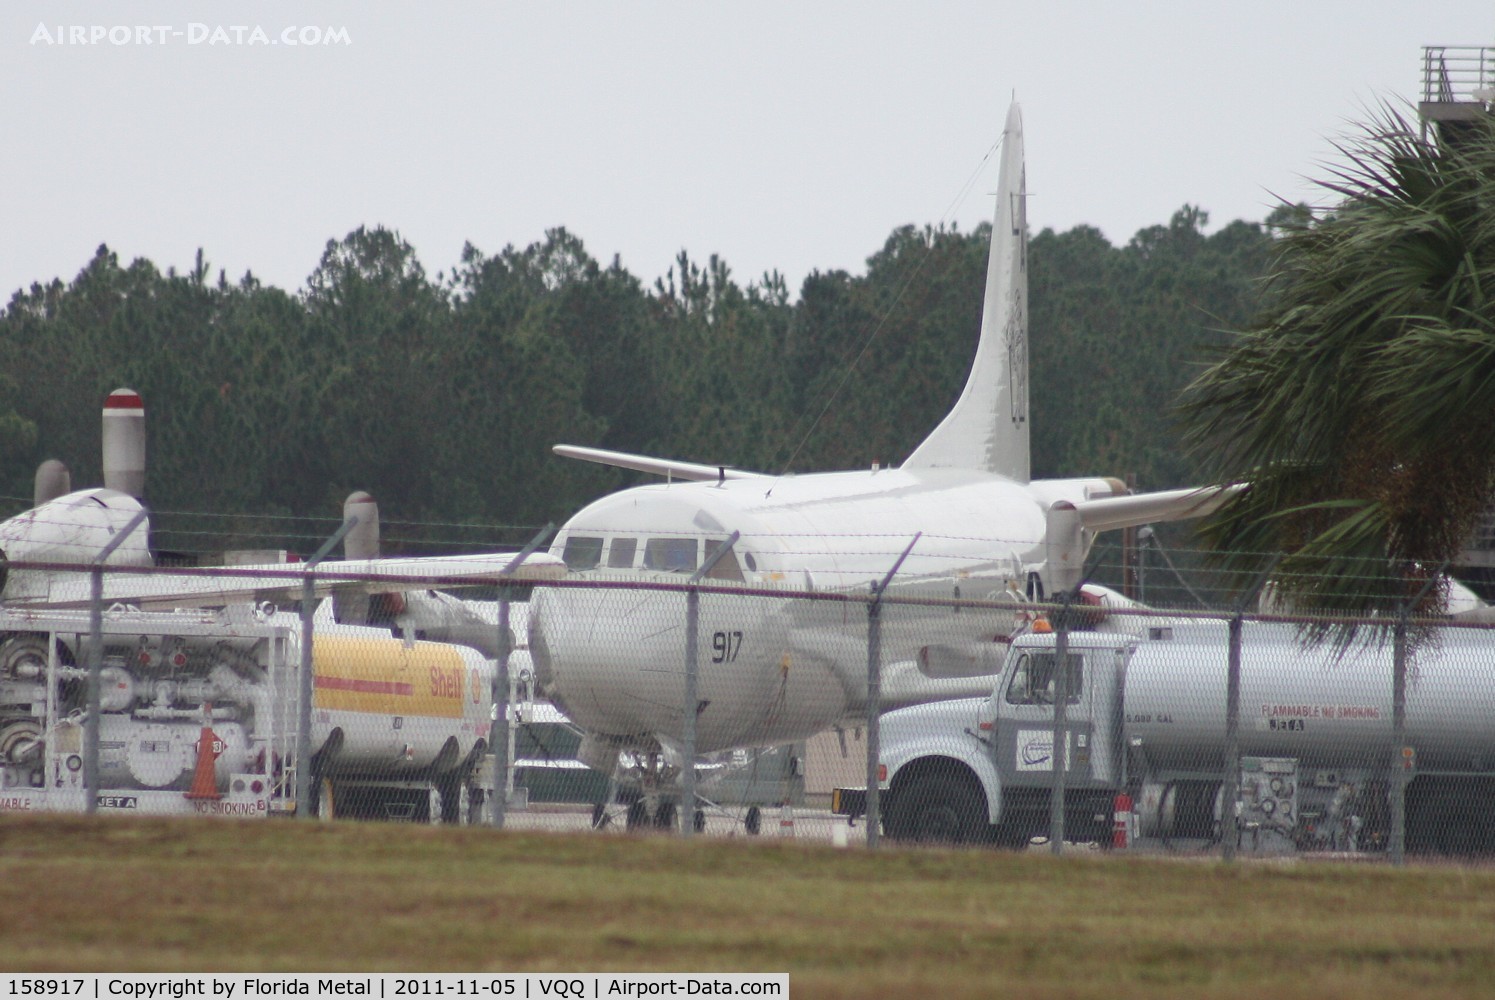 158917, Lockheed P-3C Orion C/N 285A-5589, P-3C Orion